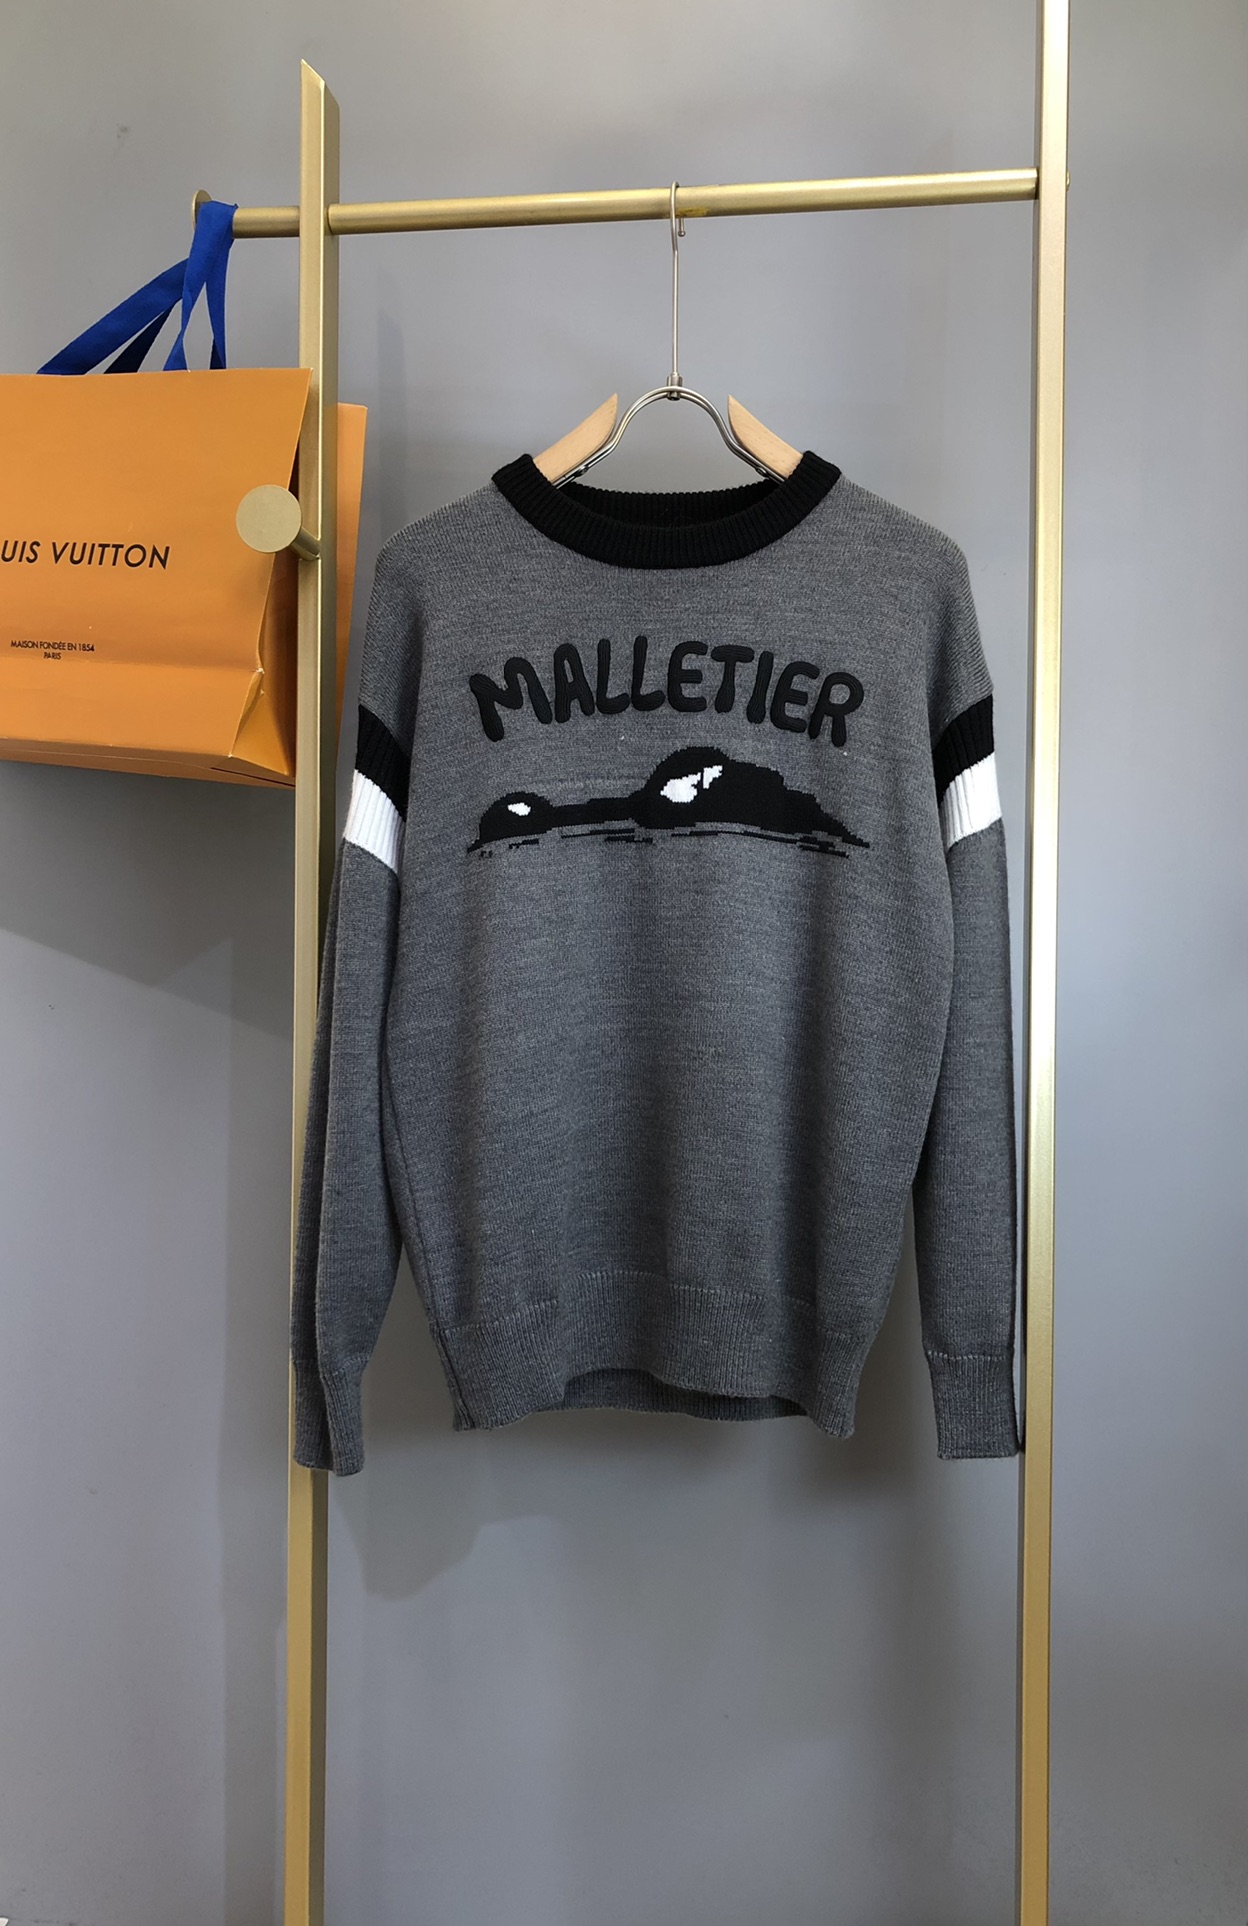 Louis Vuitton Clothing Sweatshirts Cotton Knitted Knitting Spring Collection